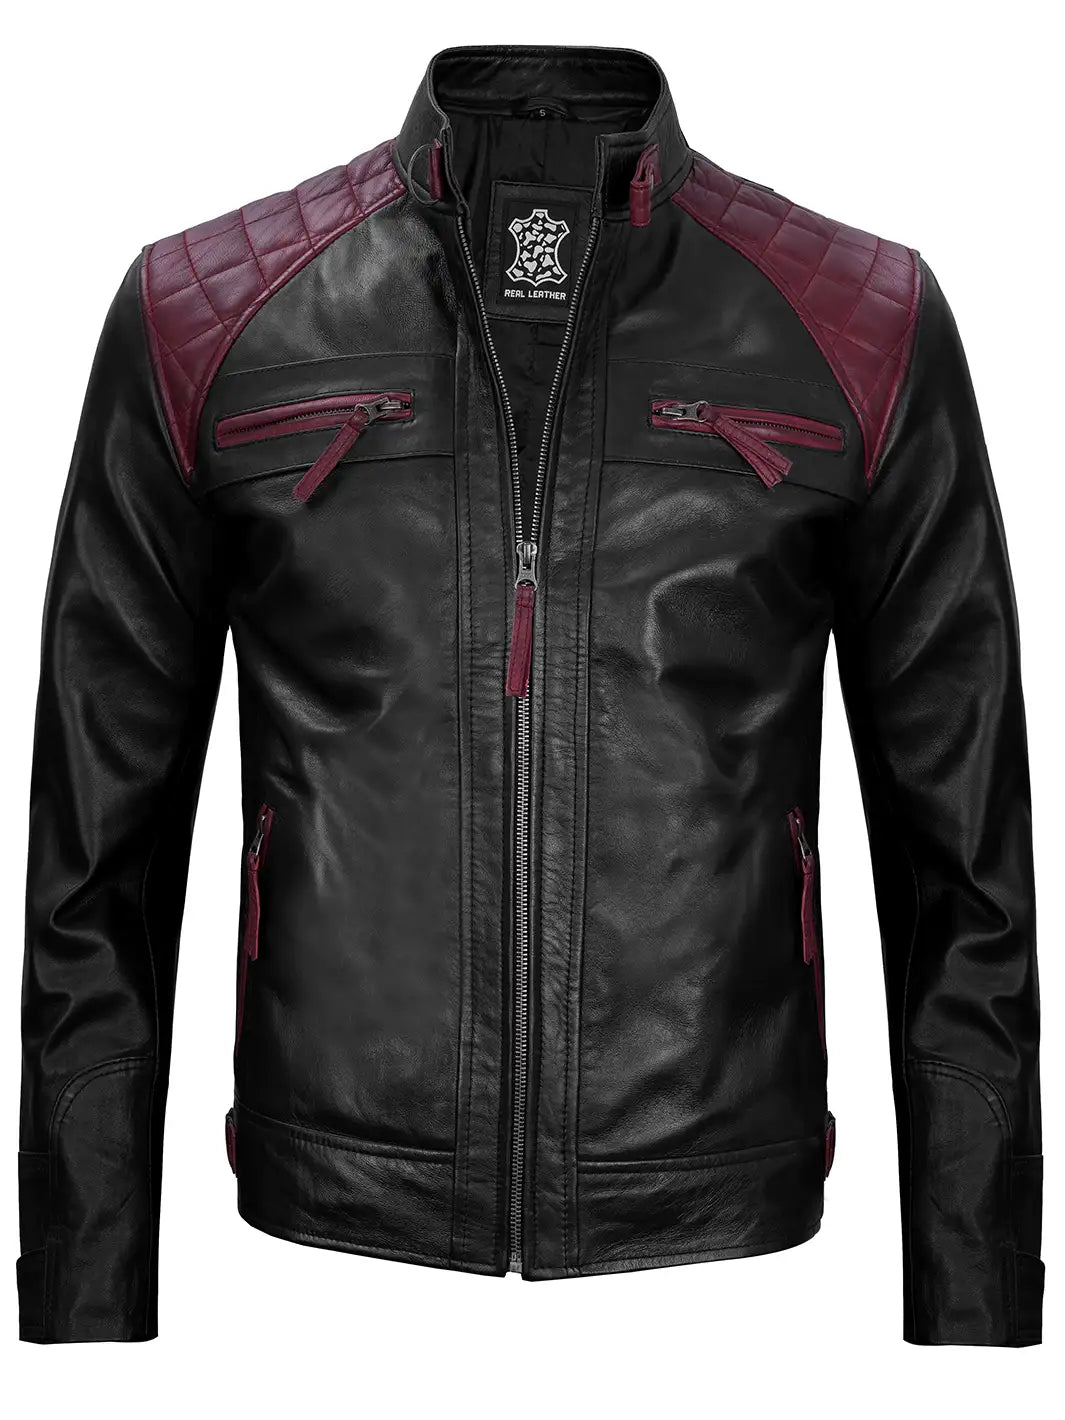 Mens black and maroon cafe racer leather jacket